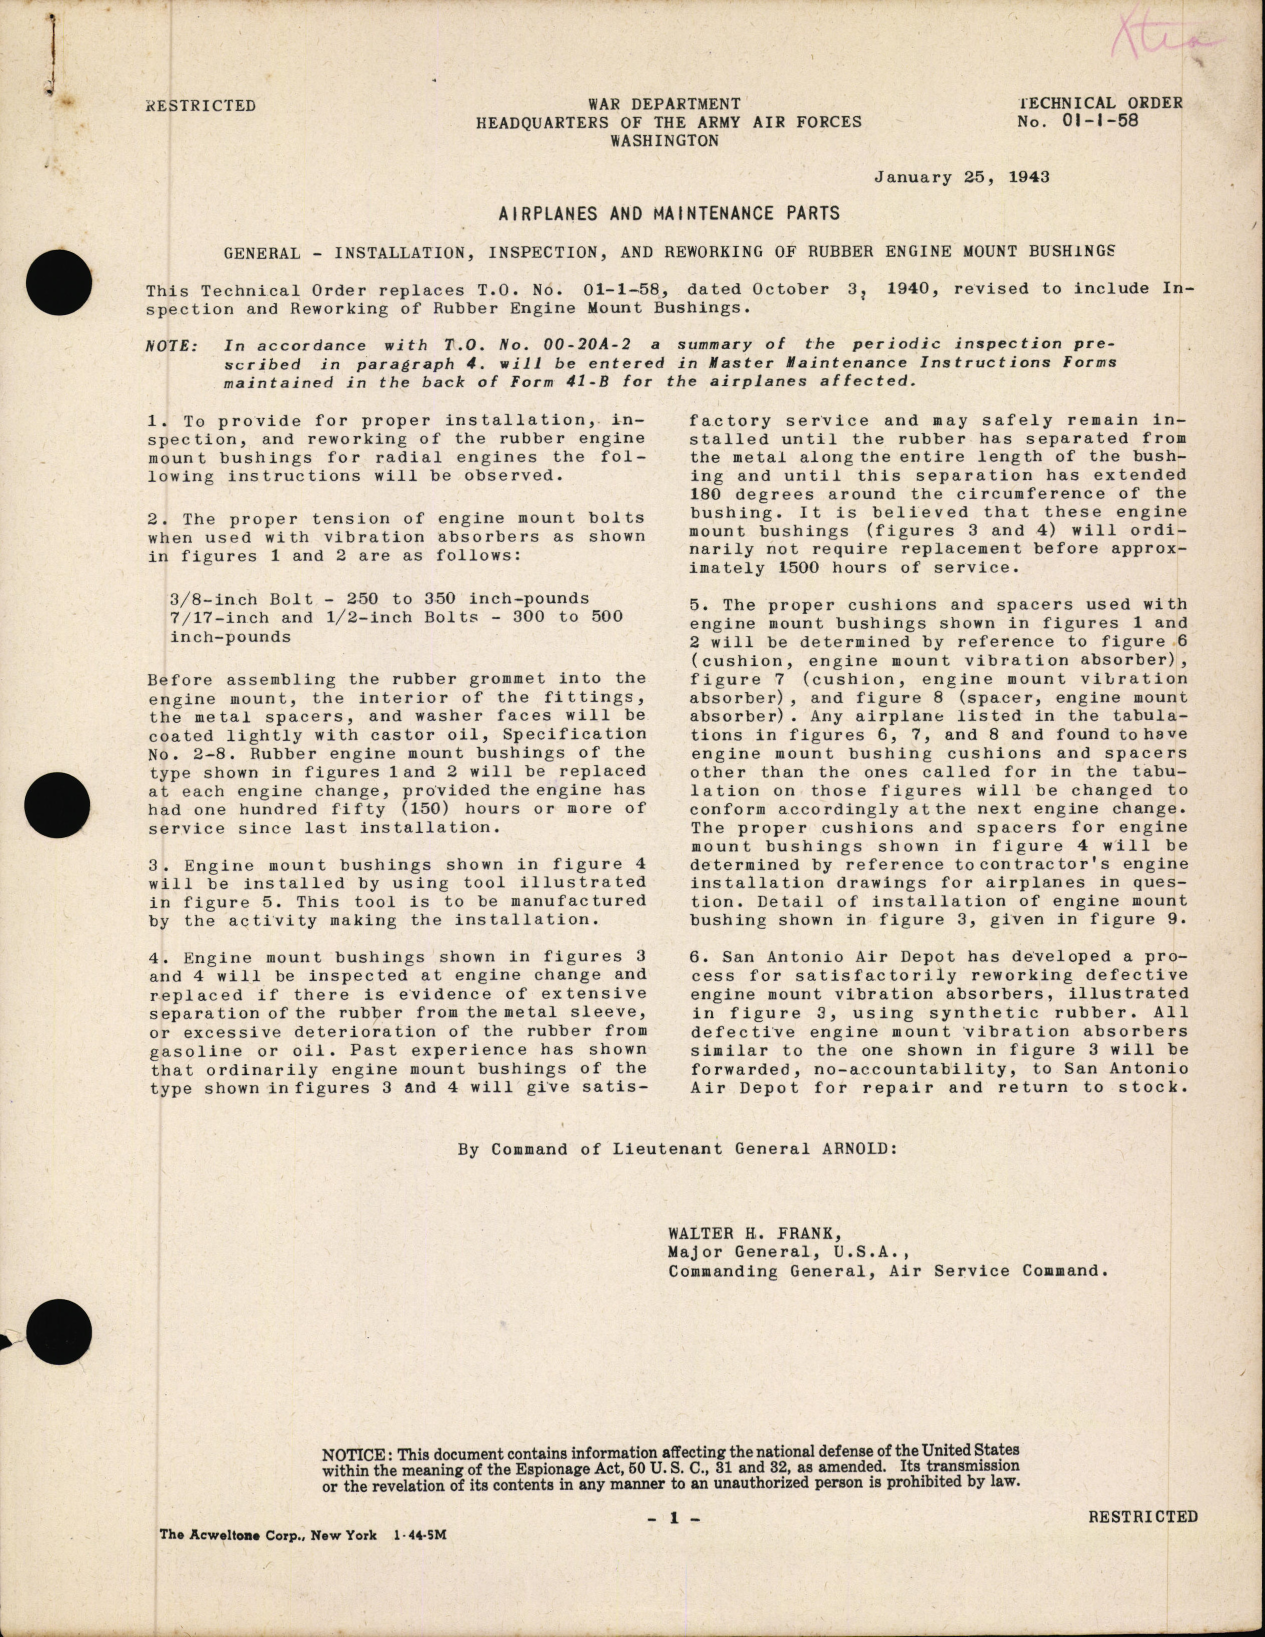 Sample page 1 from AirCorps Library document: Installation, Inspection, and Reworking of Rubber Engine Mount Bushings